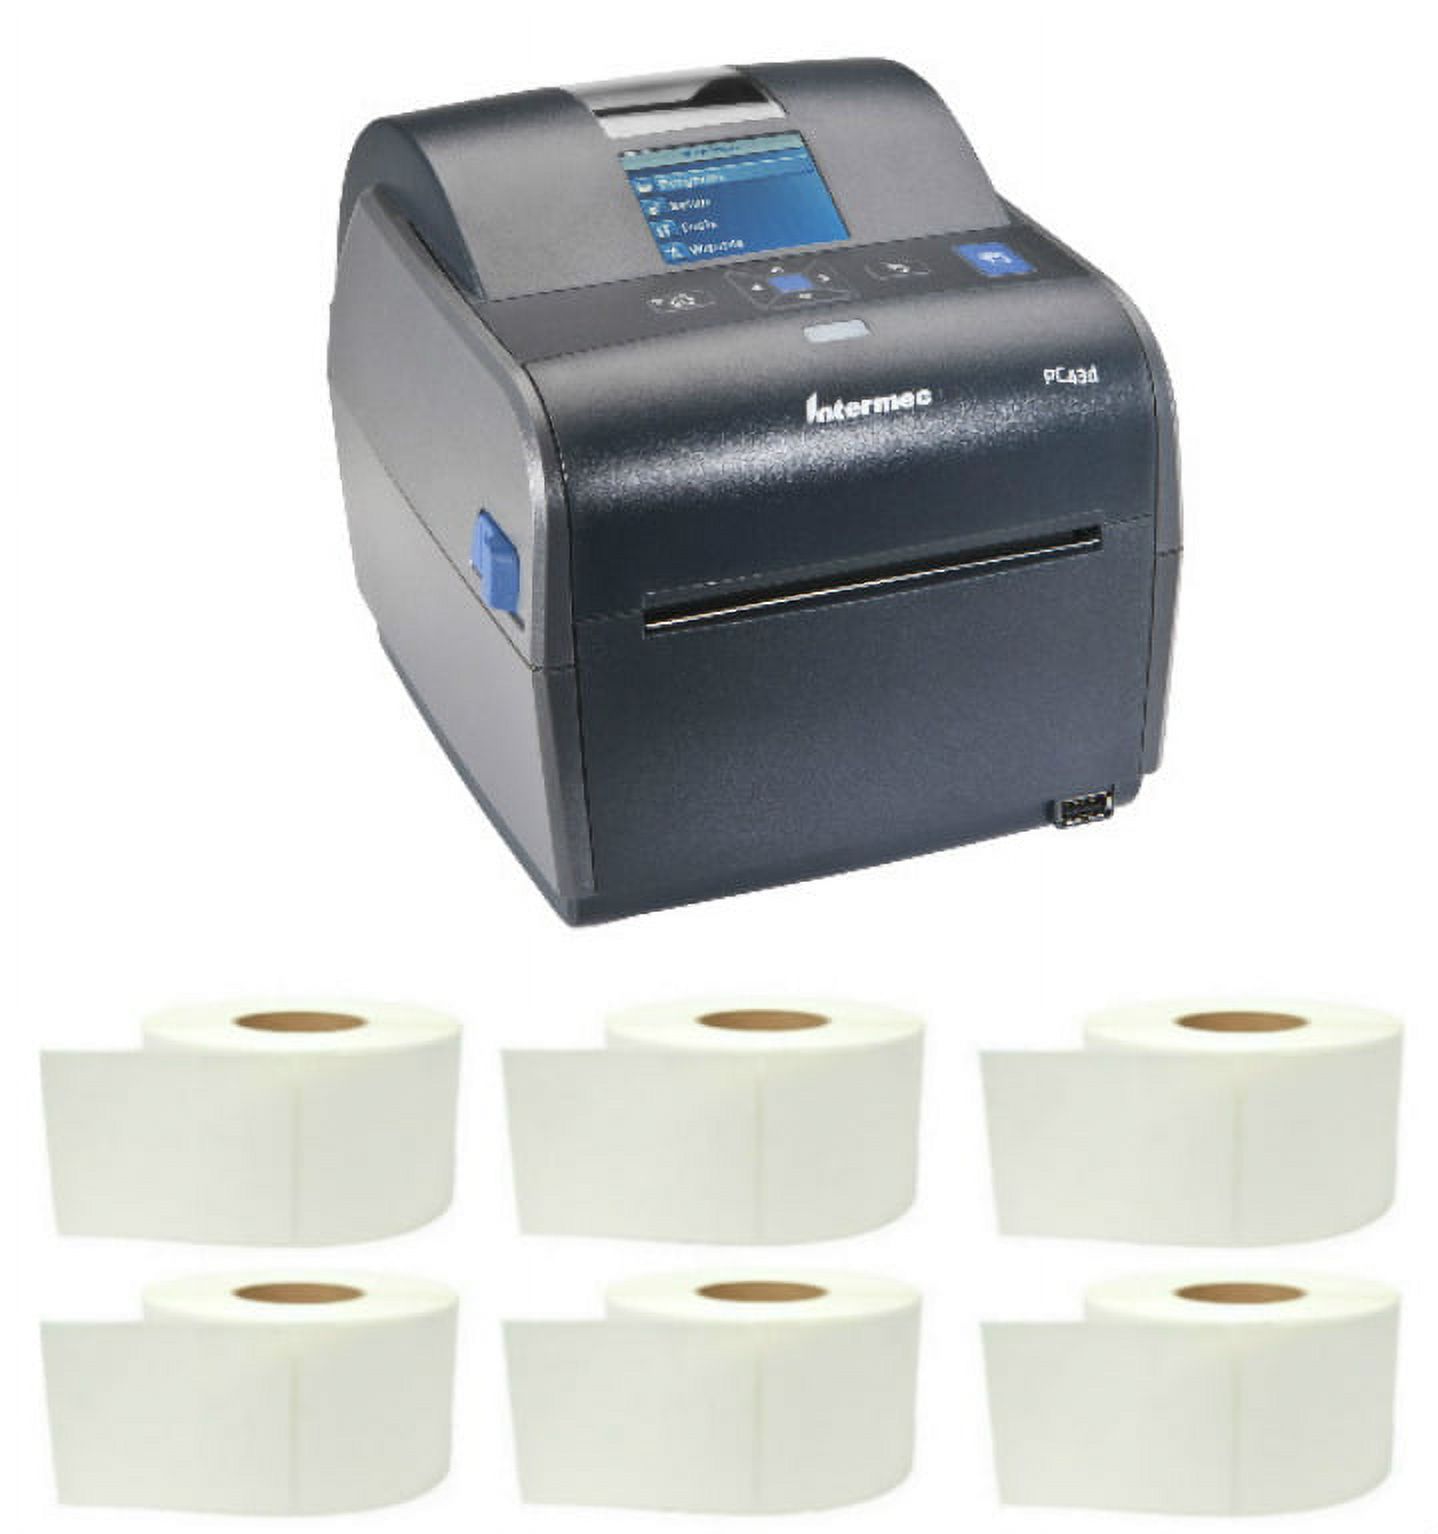 Intermec PC43d Desktop Direct Thermal Label Printer with LCD Display and  USB, Easy-to-Use Barcode Label Printer with Rolls of 4